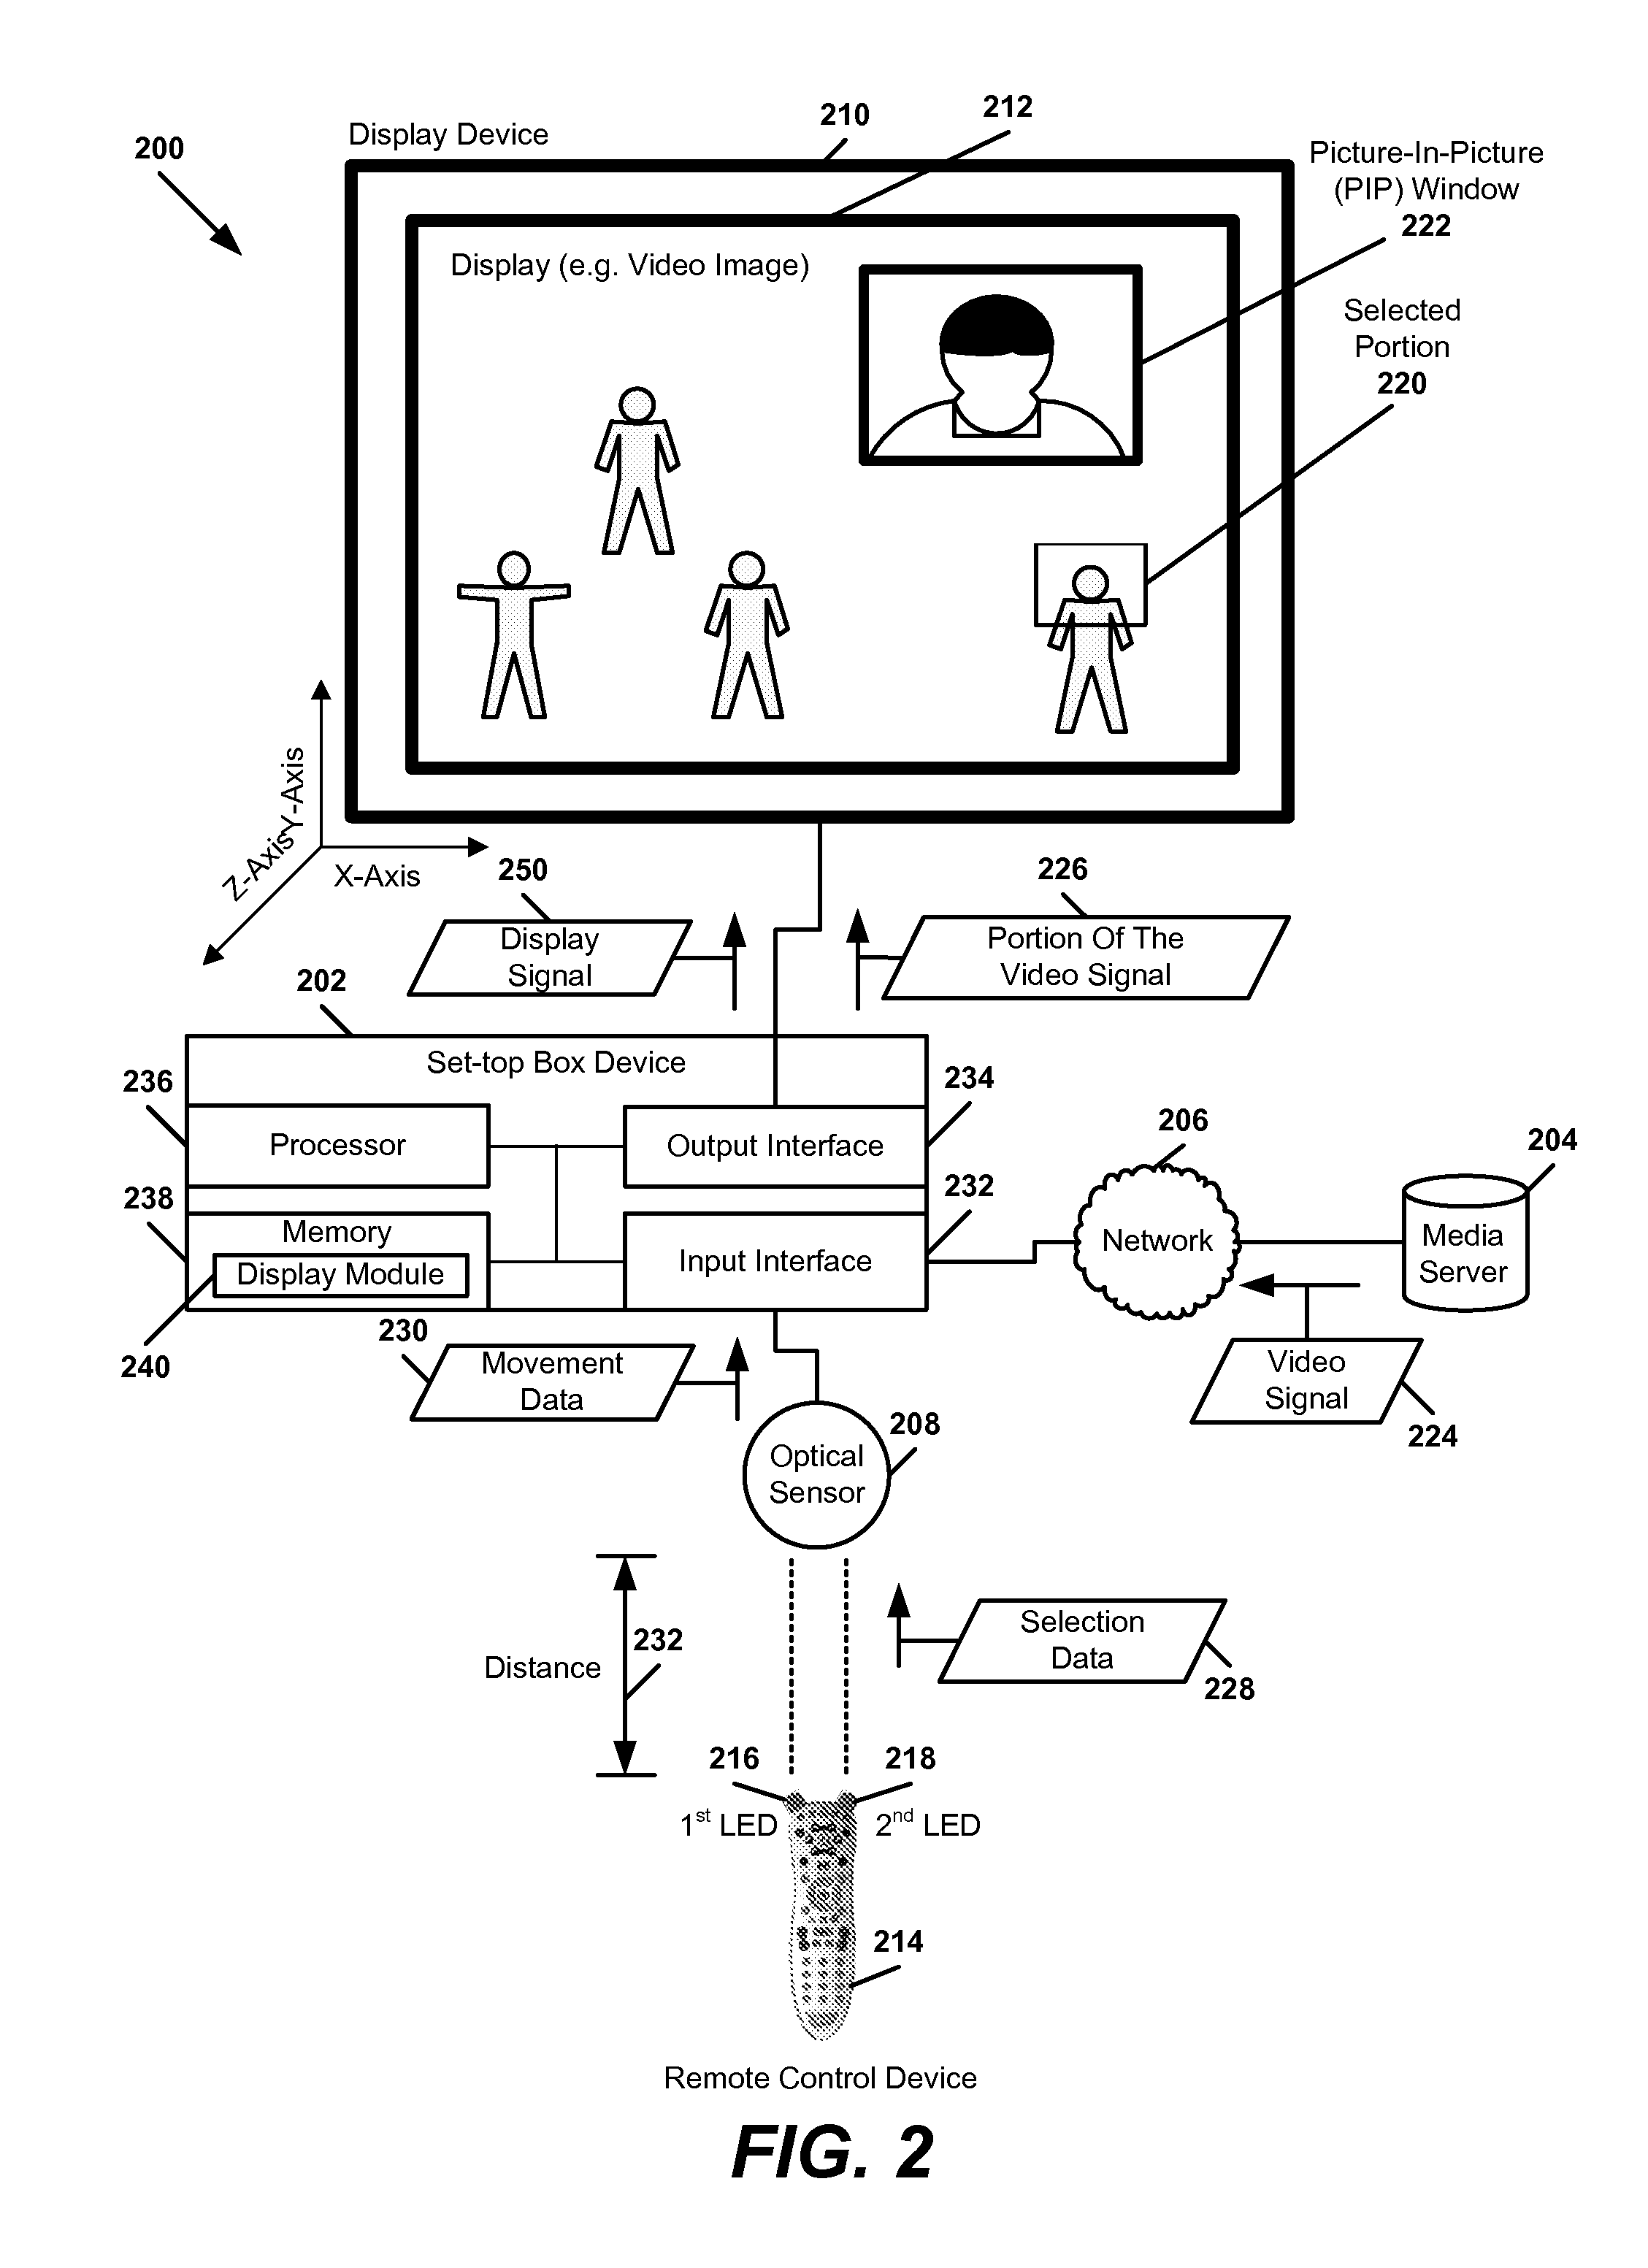 System and Method to Control and Present a Picture-In-Picture (PIP) Window Based on Movement Data